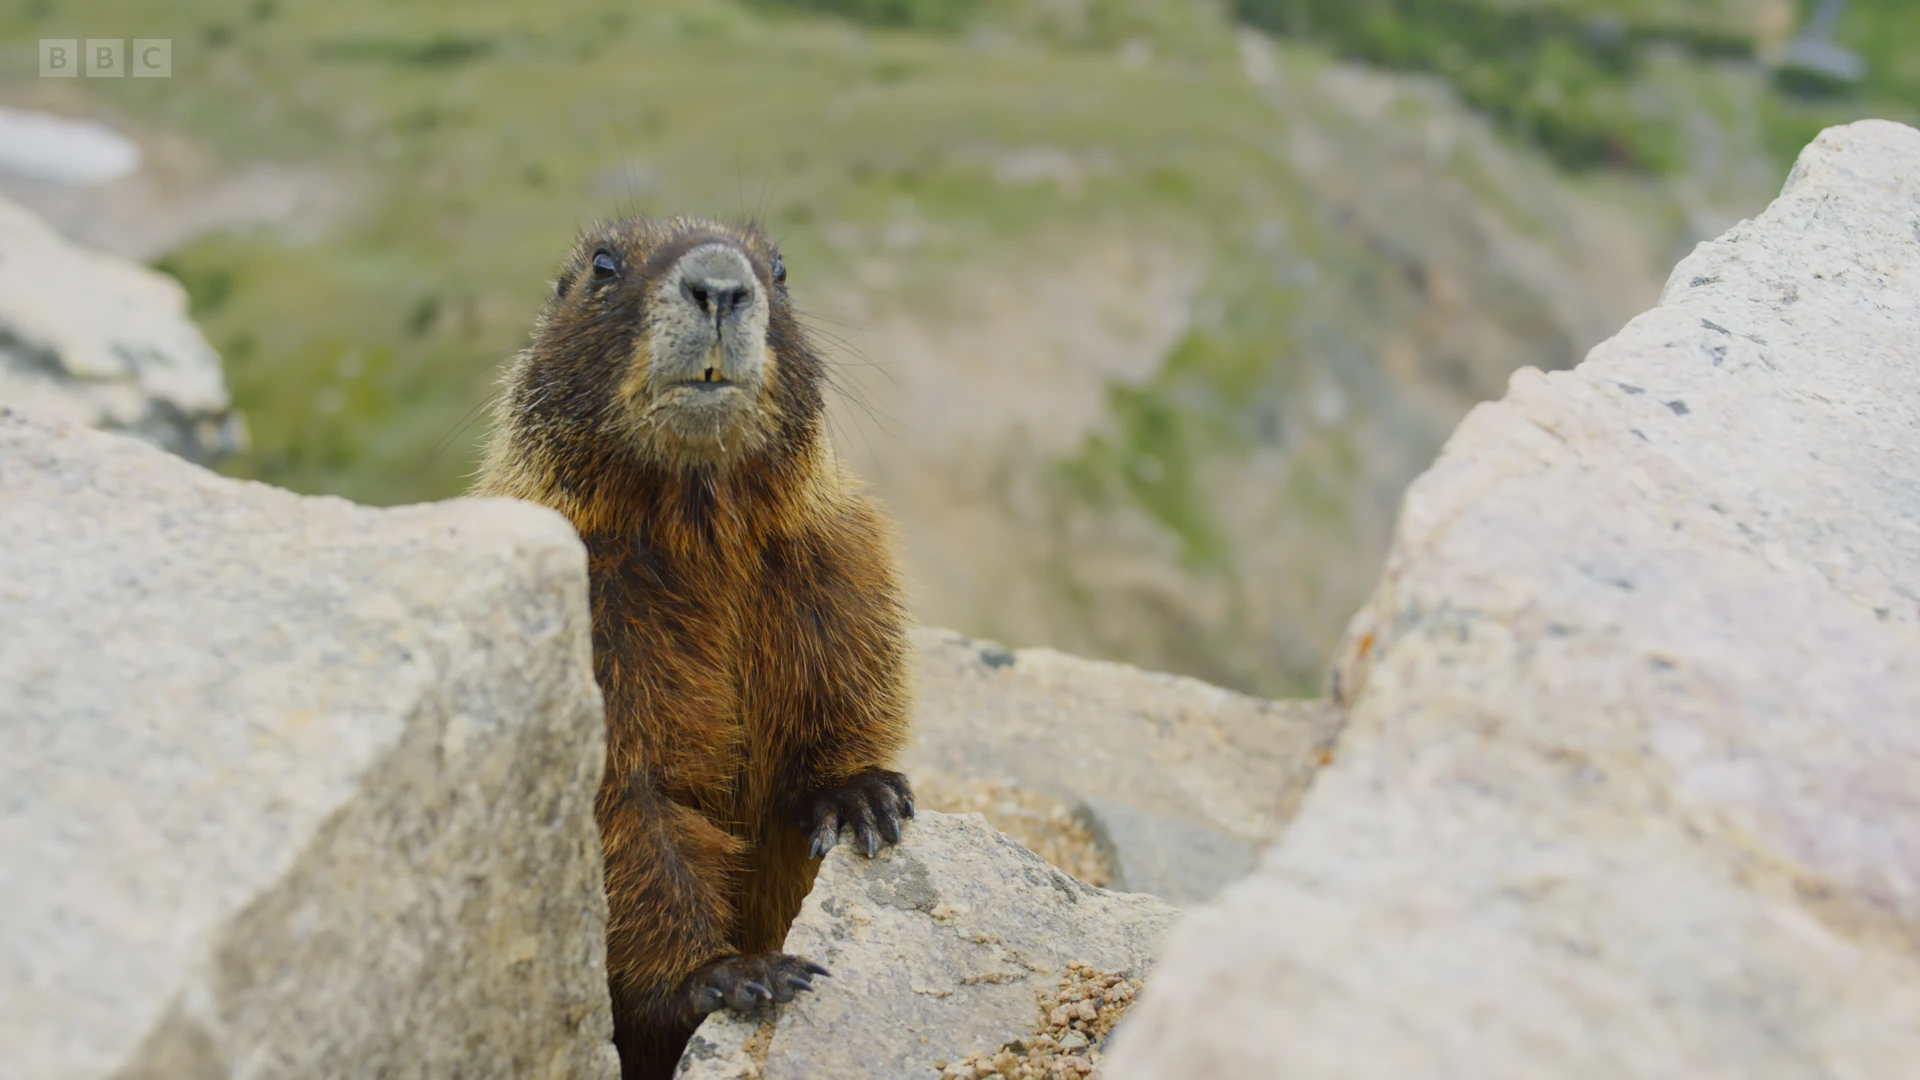 Yellow-bellied marmot (Marmota flaviventris) as shown in Planet Earth II - Mountains